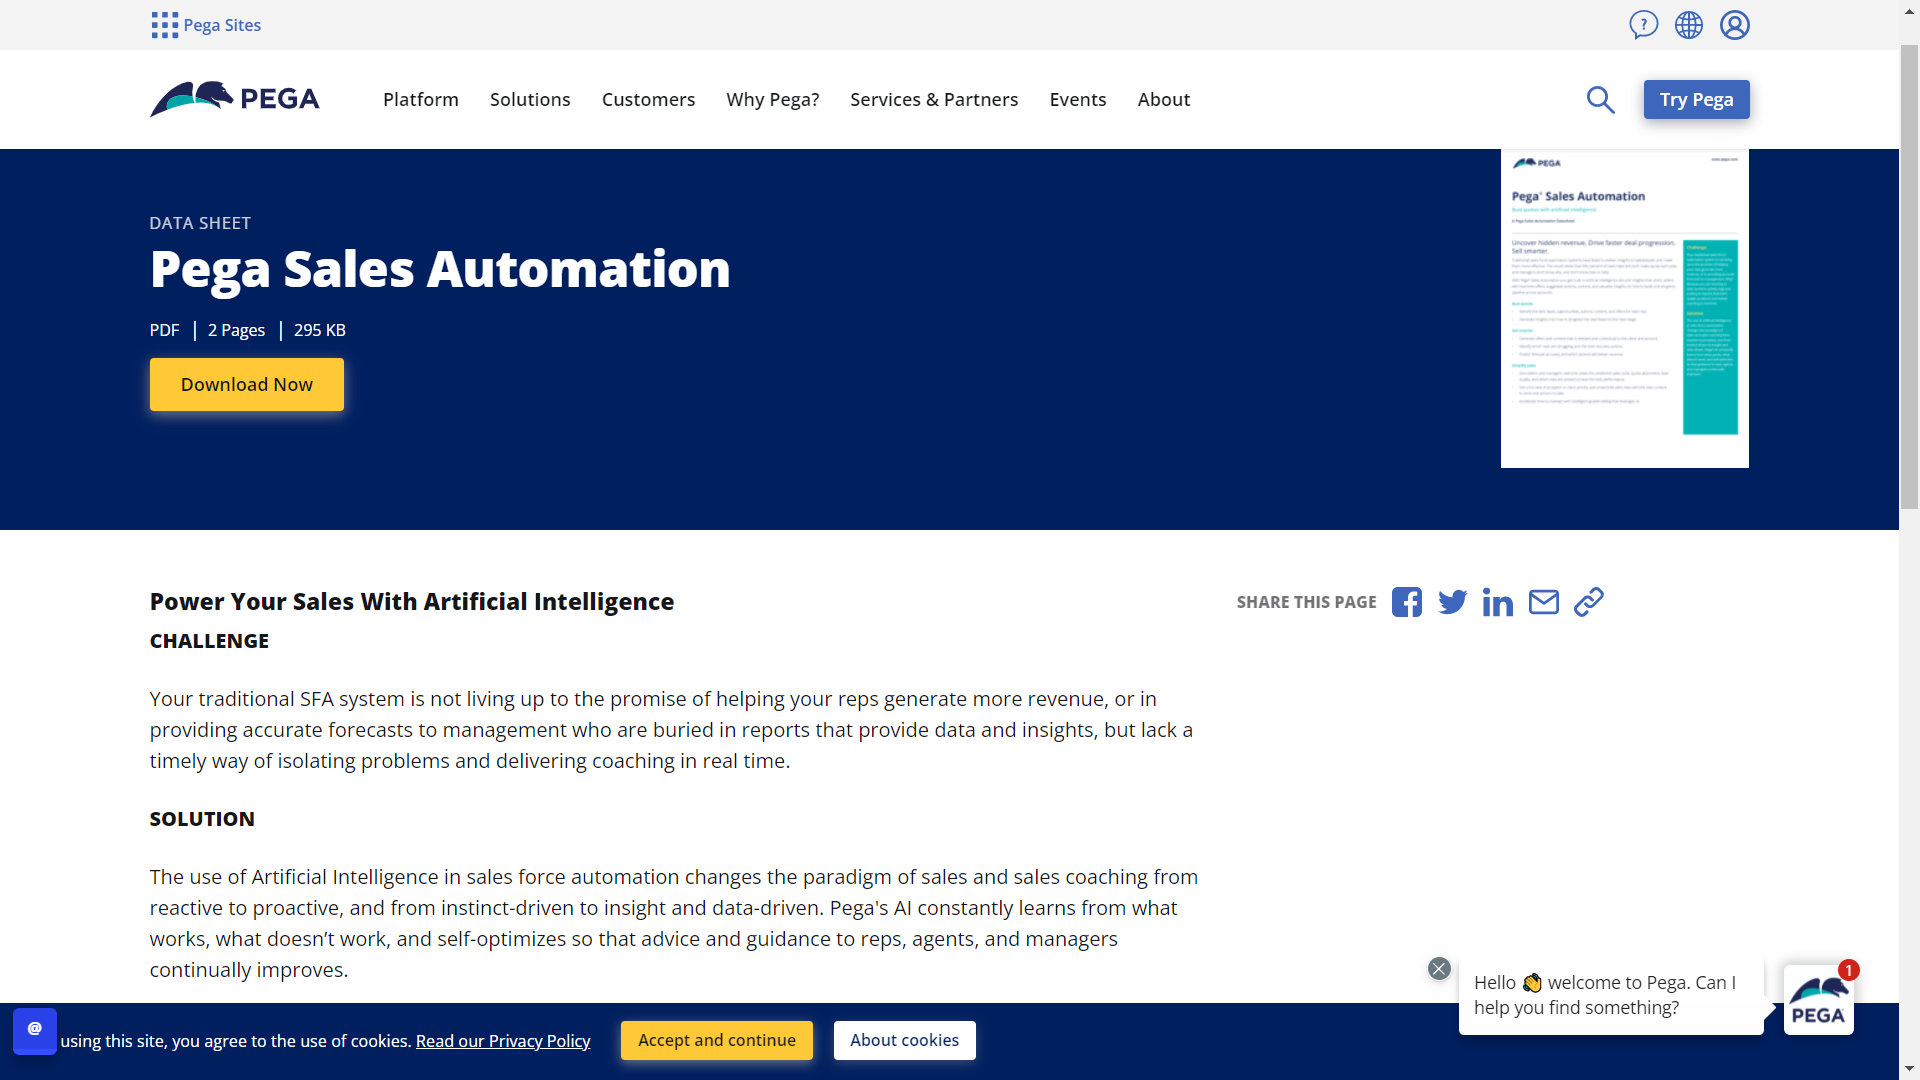 Pega Sales Automation Website User Interface